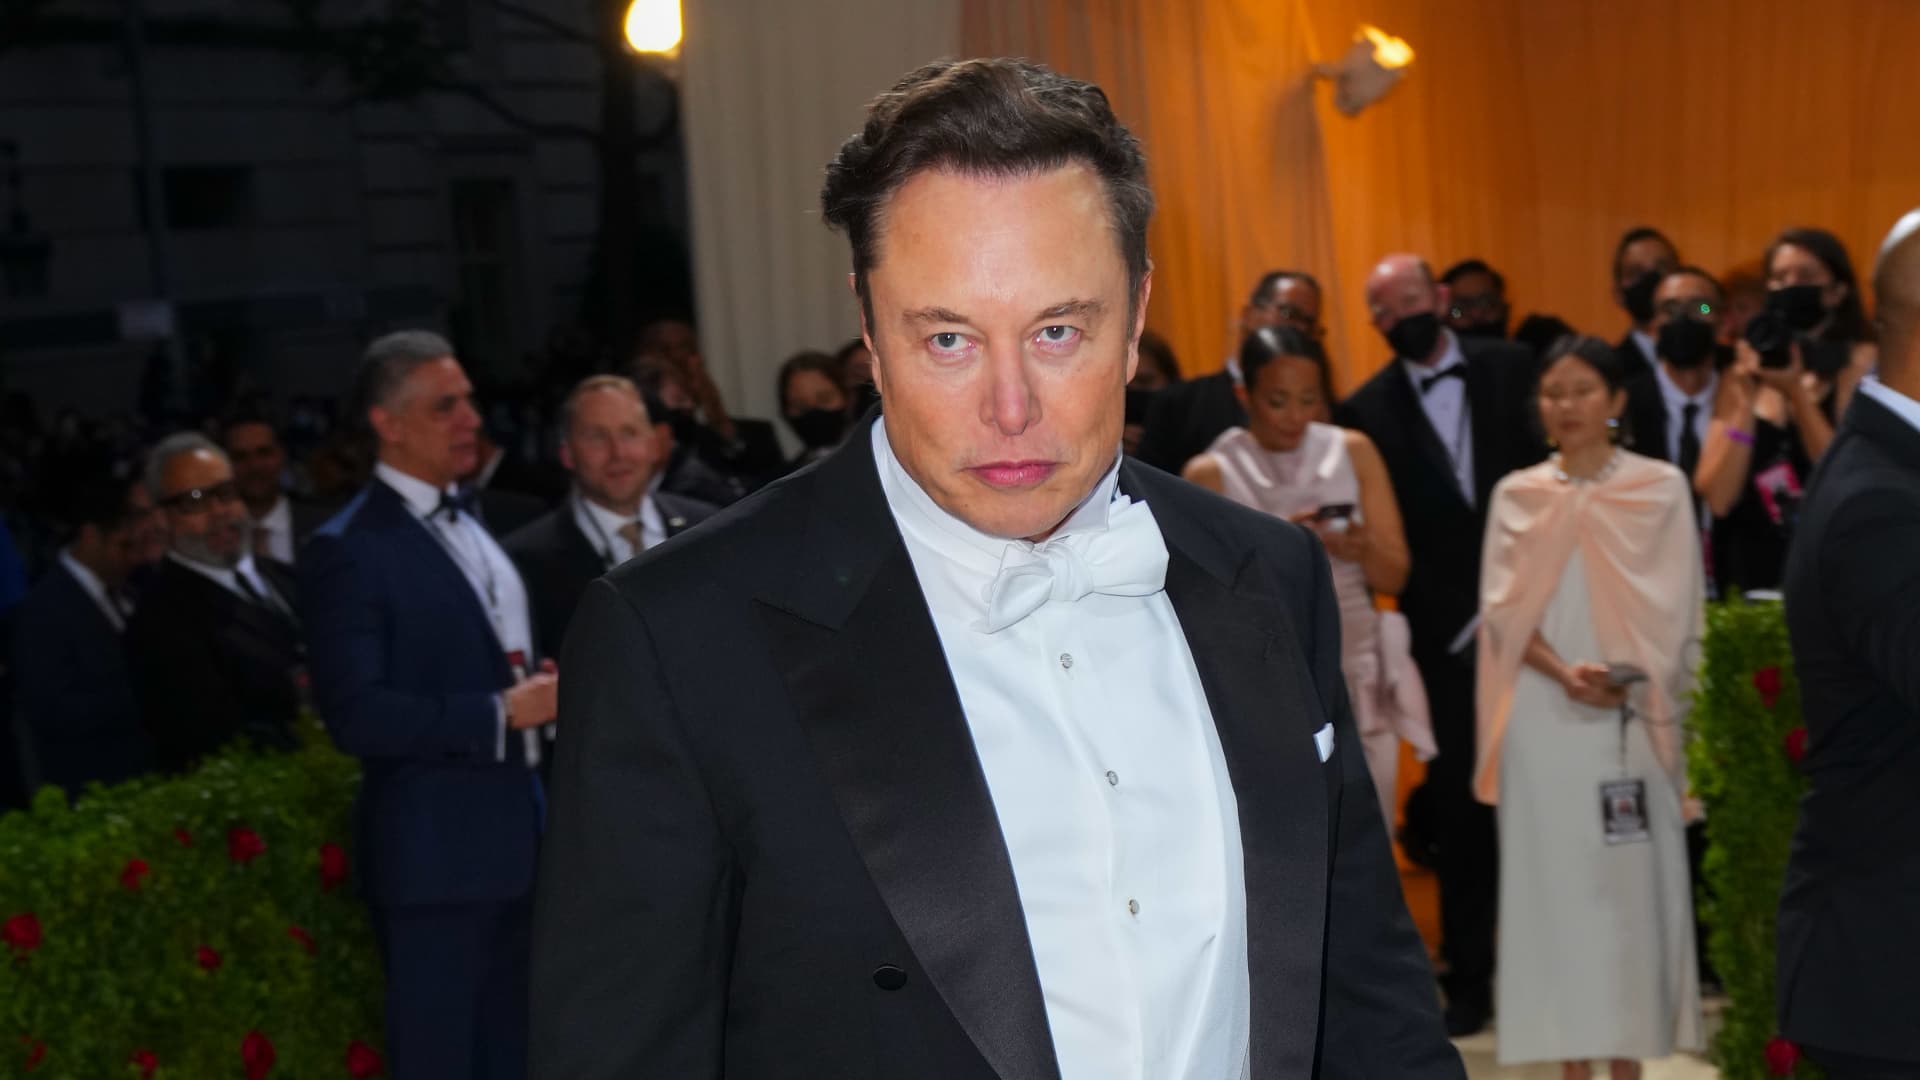 Tesla stock has dropped 35% since Elon Musk first said he'd buy Twitter